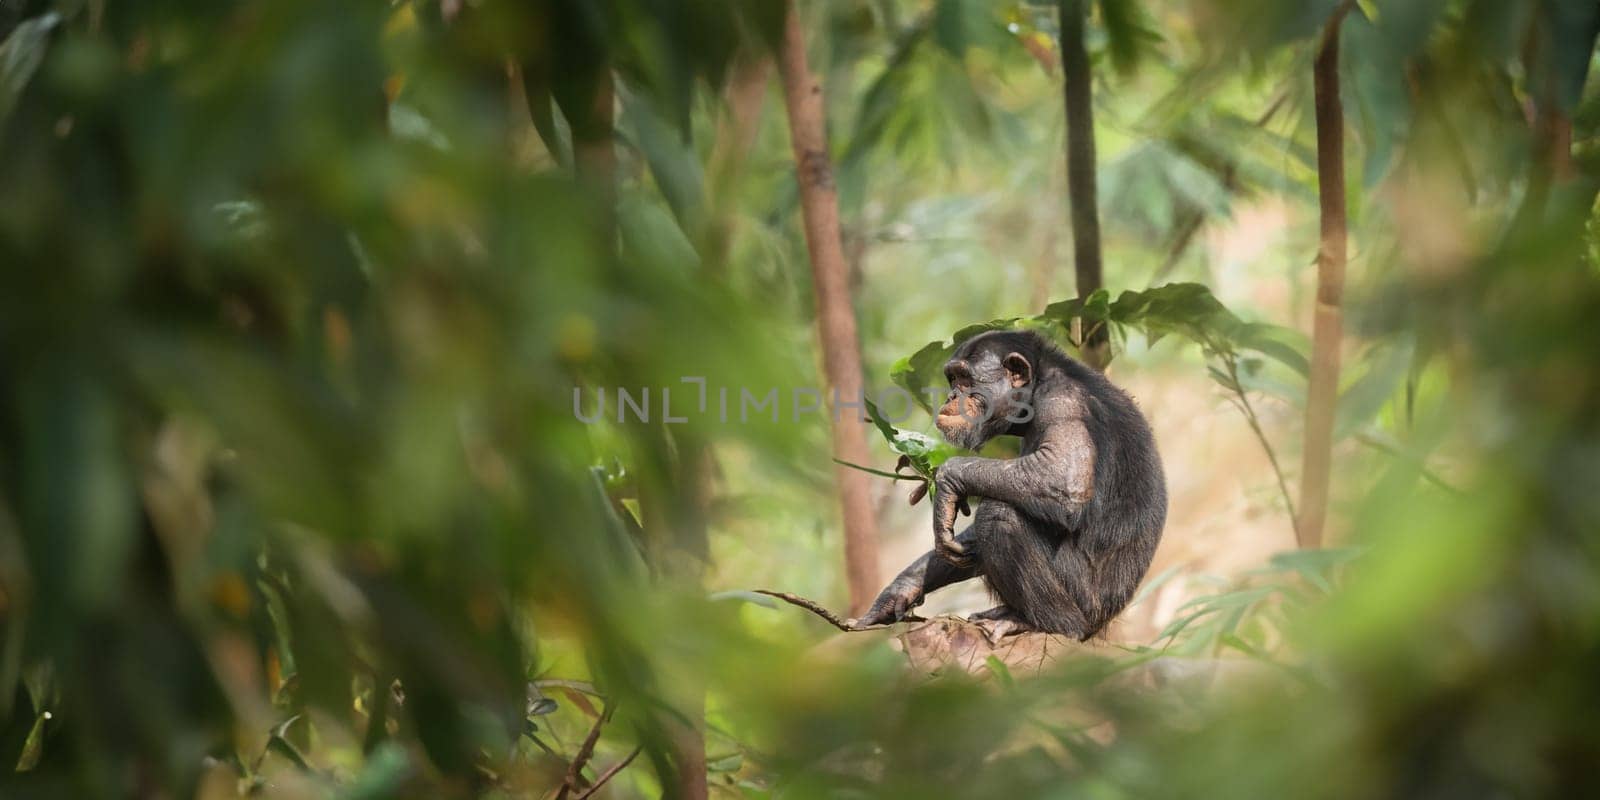 A monkey chimpanzee sitting in the middle of a forest